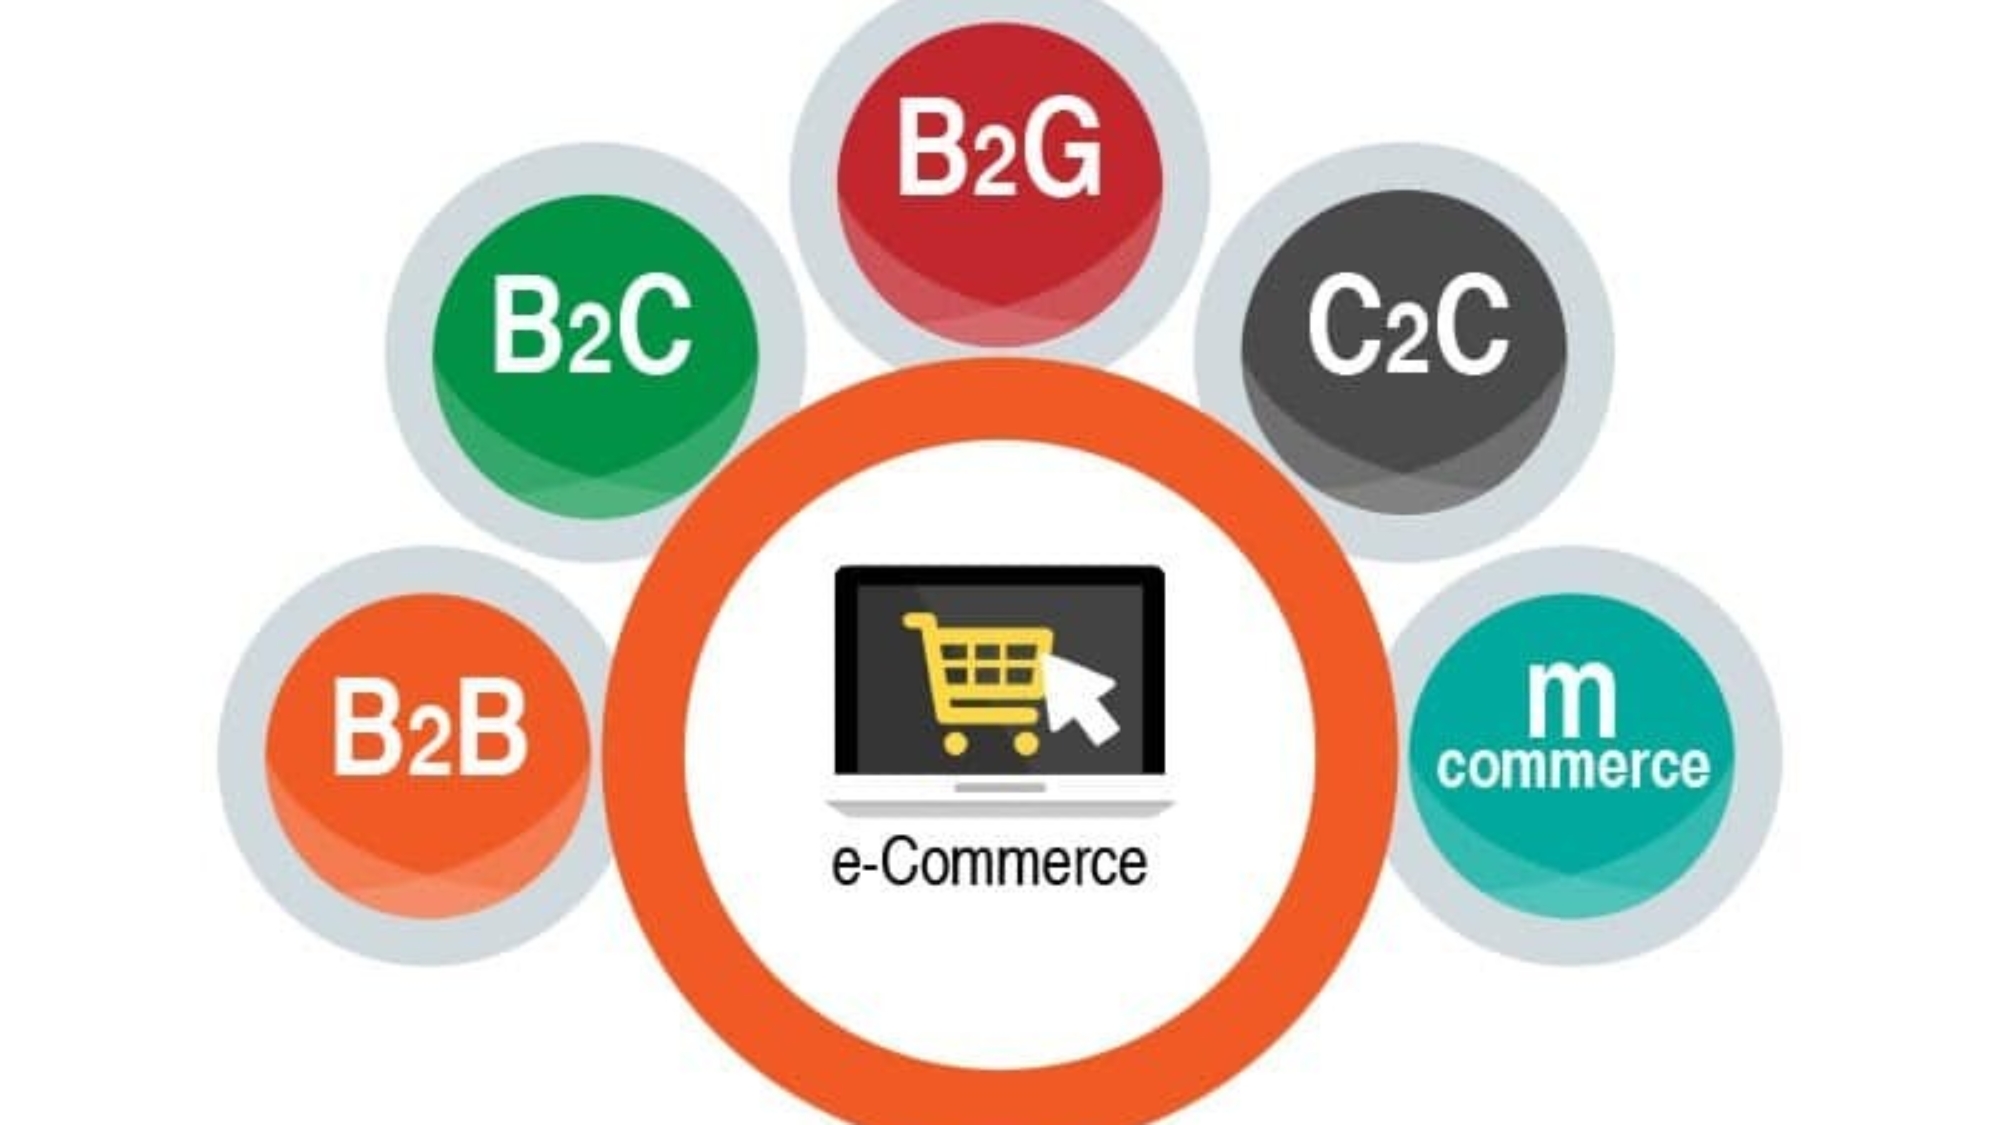 ecommerce types of online business